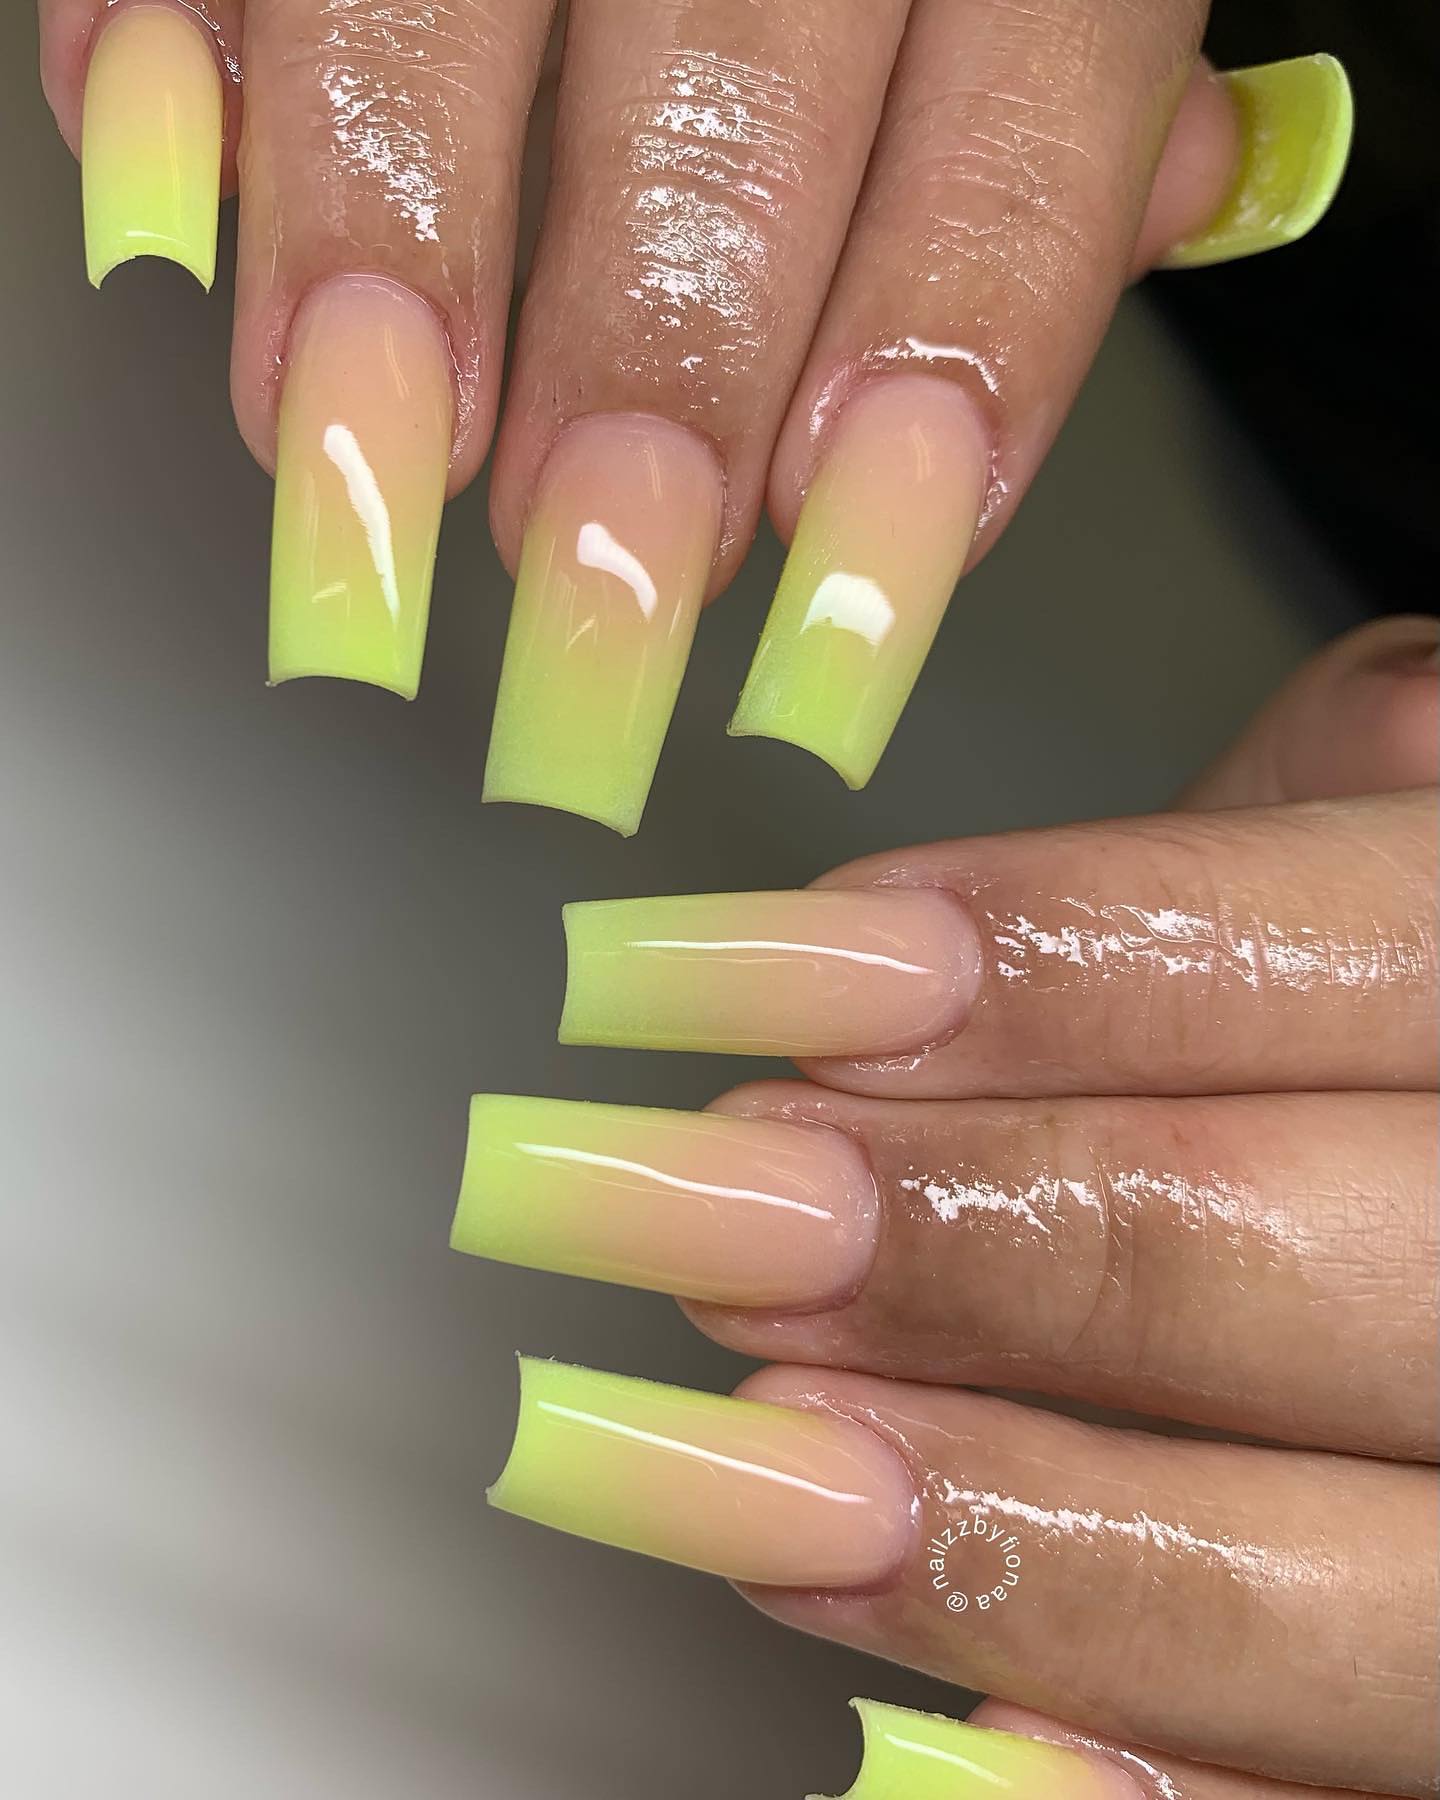 Square yellow and done in this ombré way, this manicure is for women who like neat and clean lines.